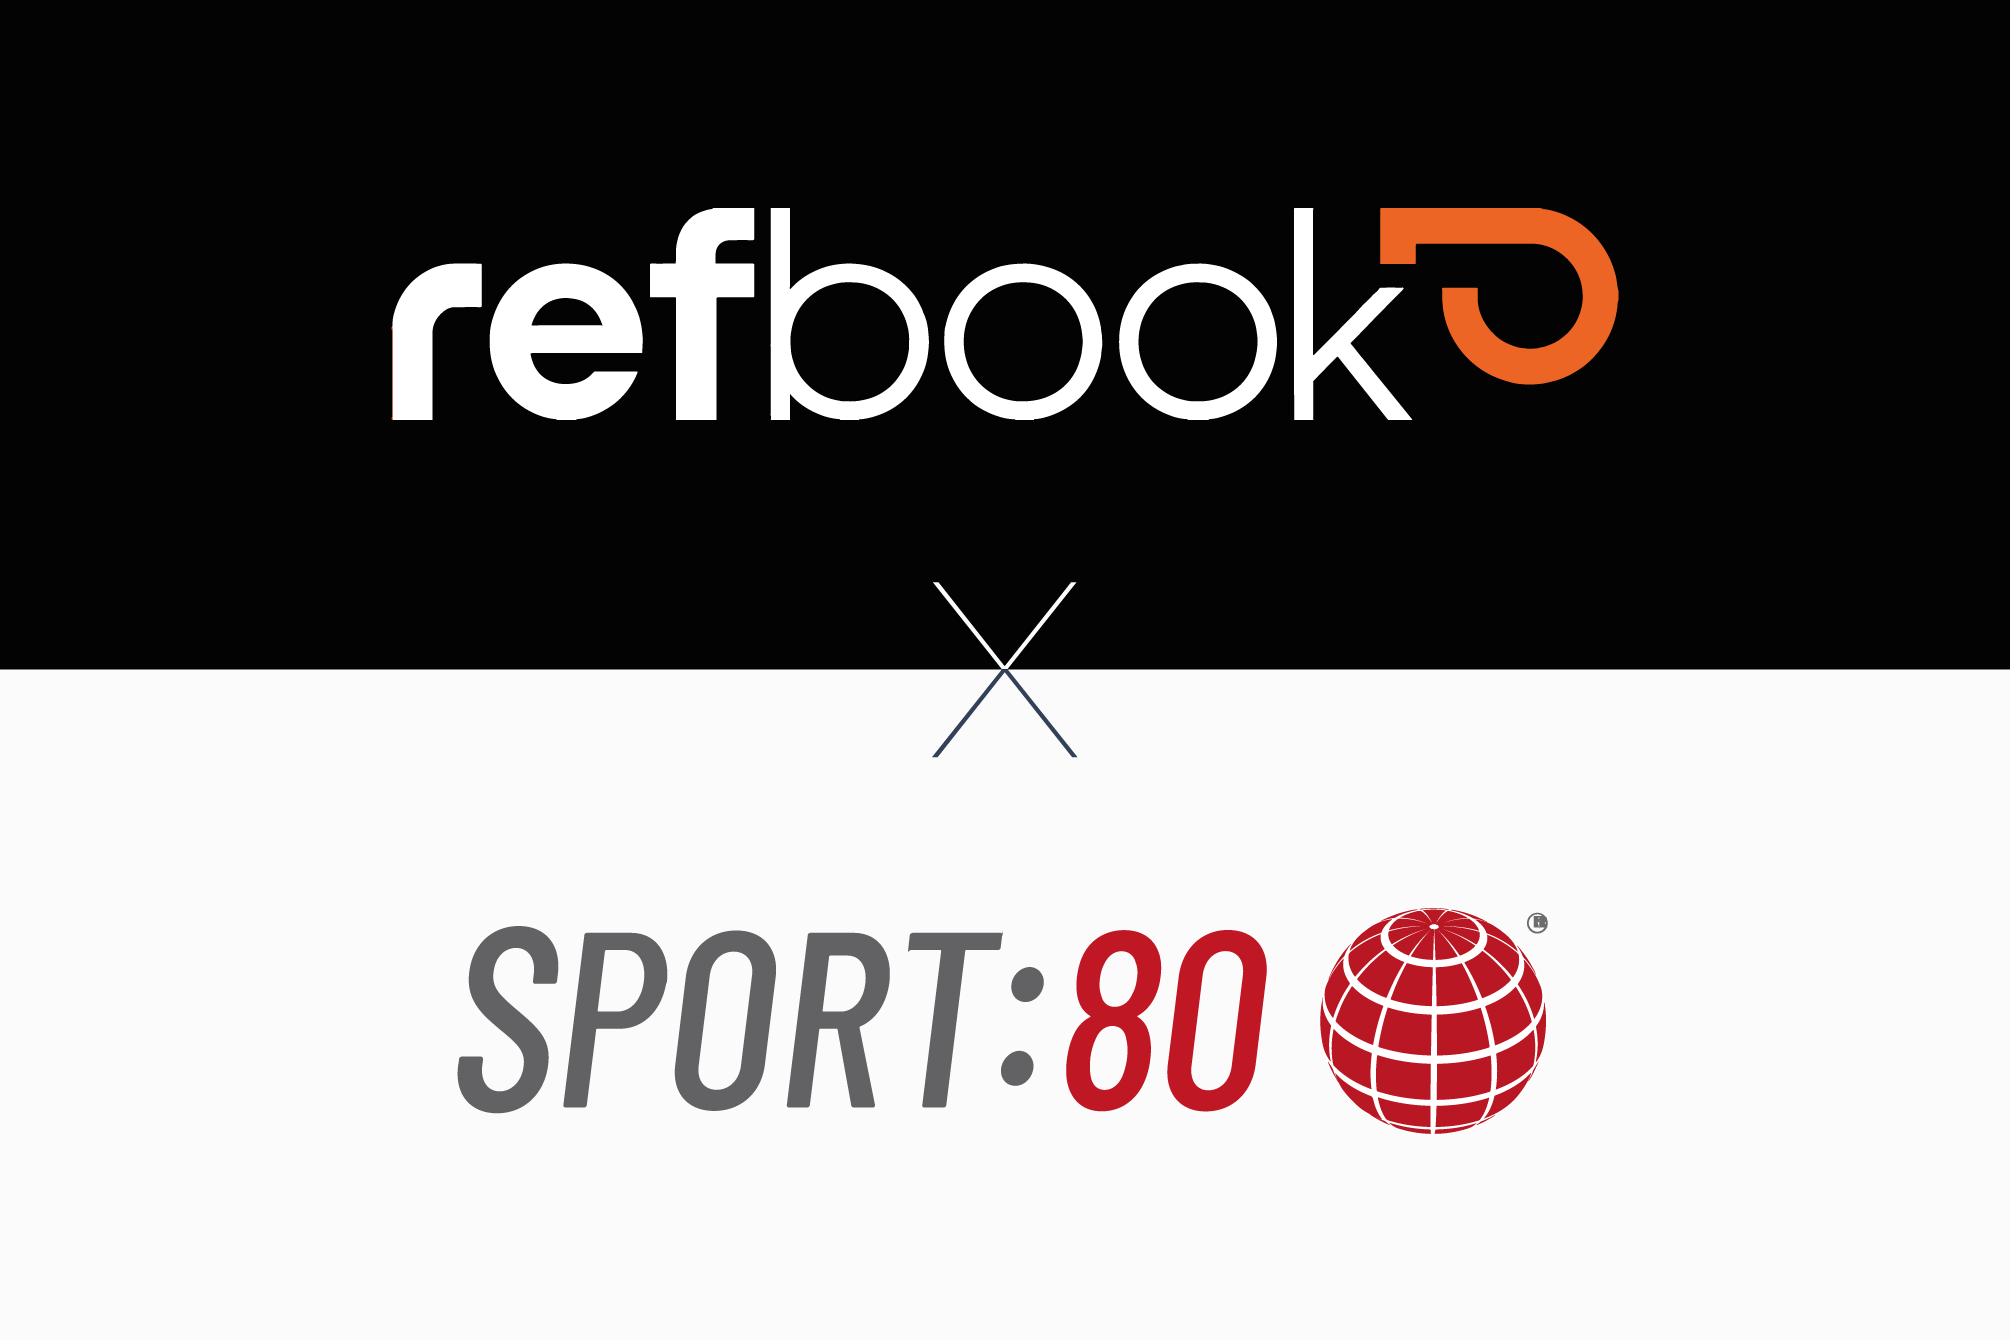 Sport:80 partner with refbook to streamline management of officials